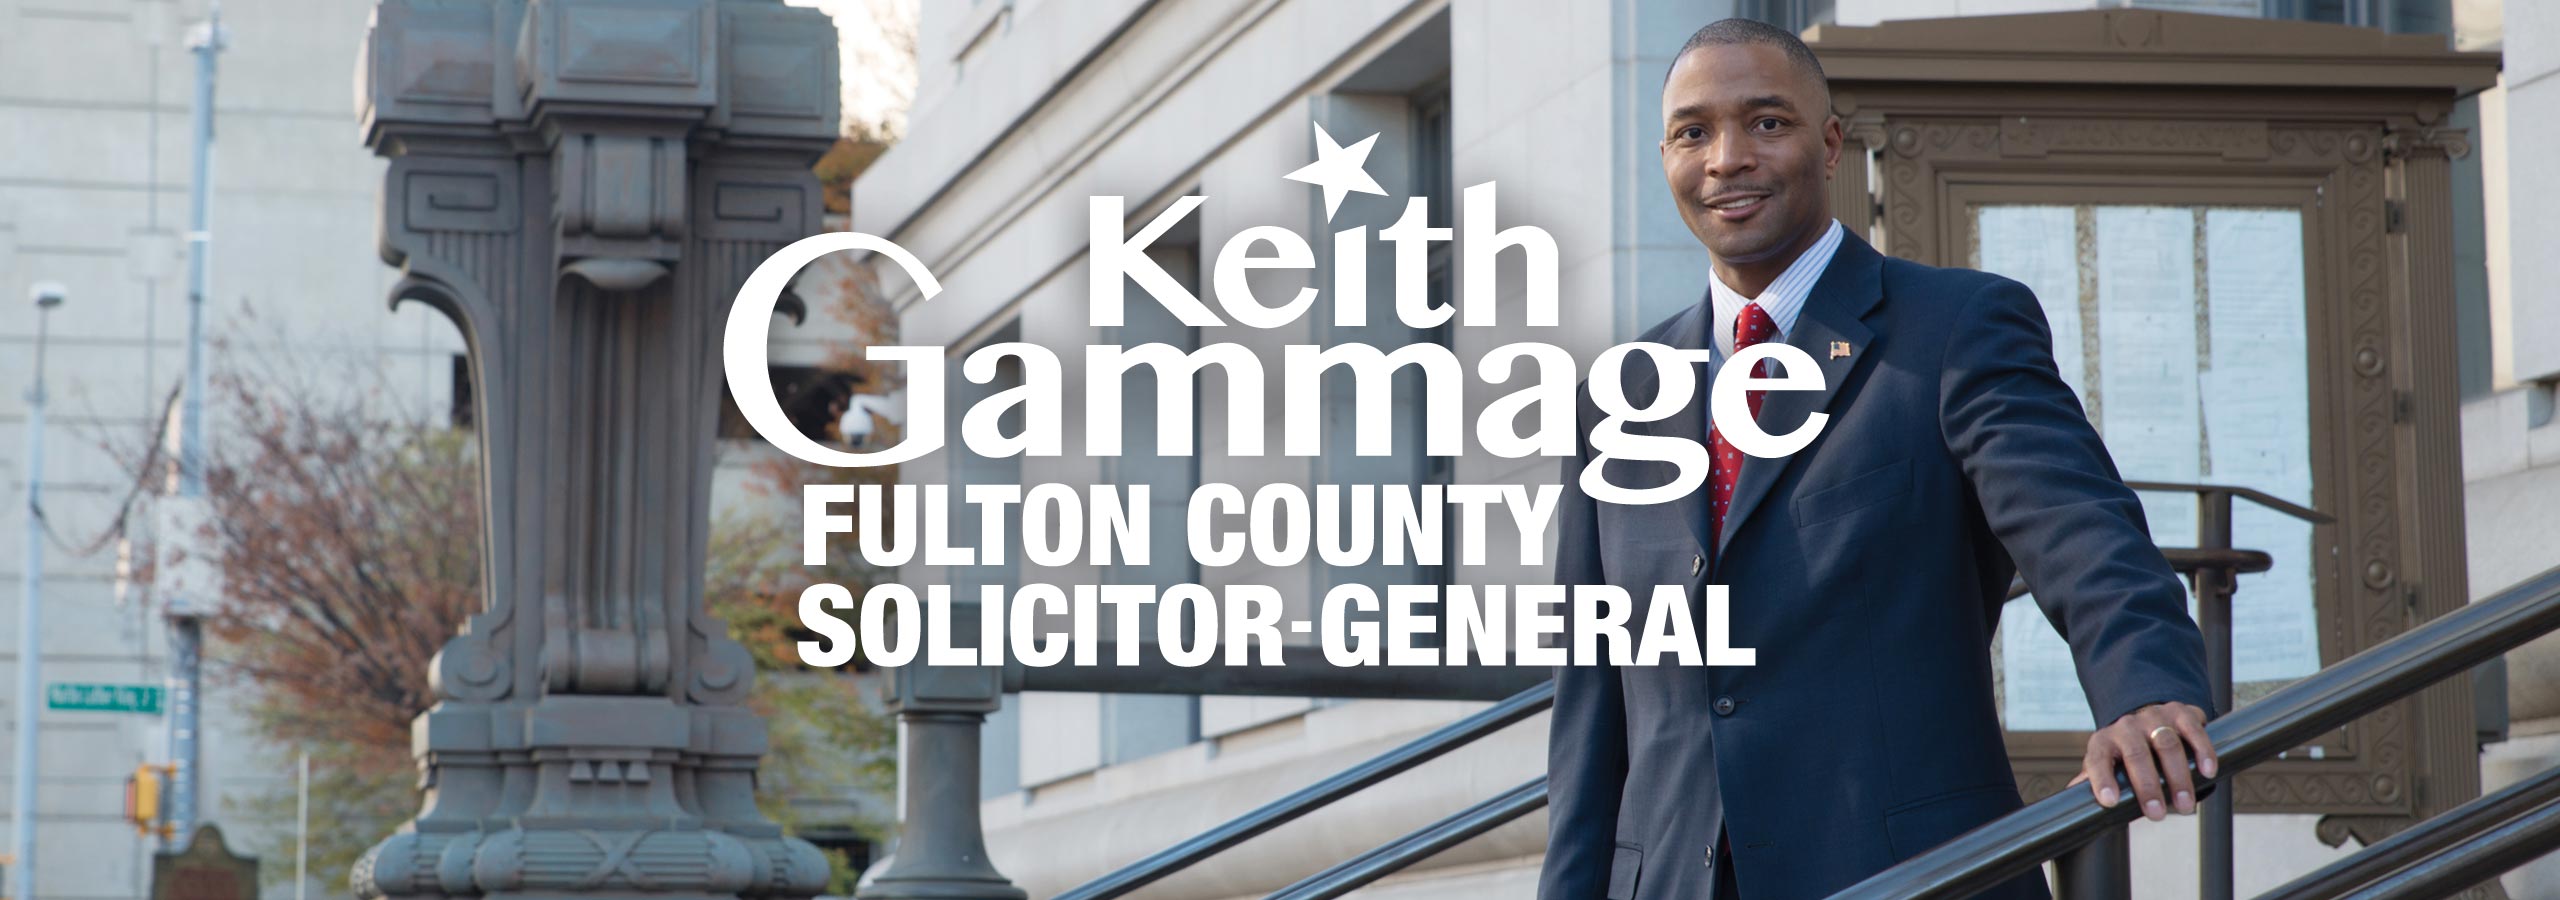 Elect Keith Gammage Fulton Solicitor-General